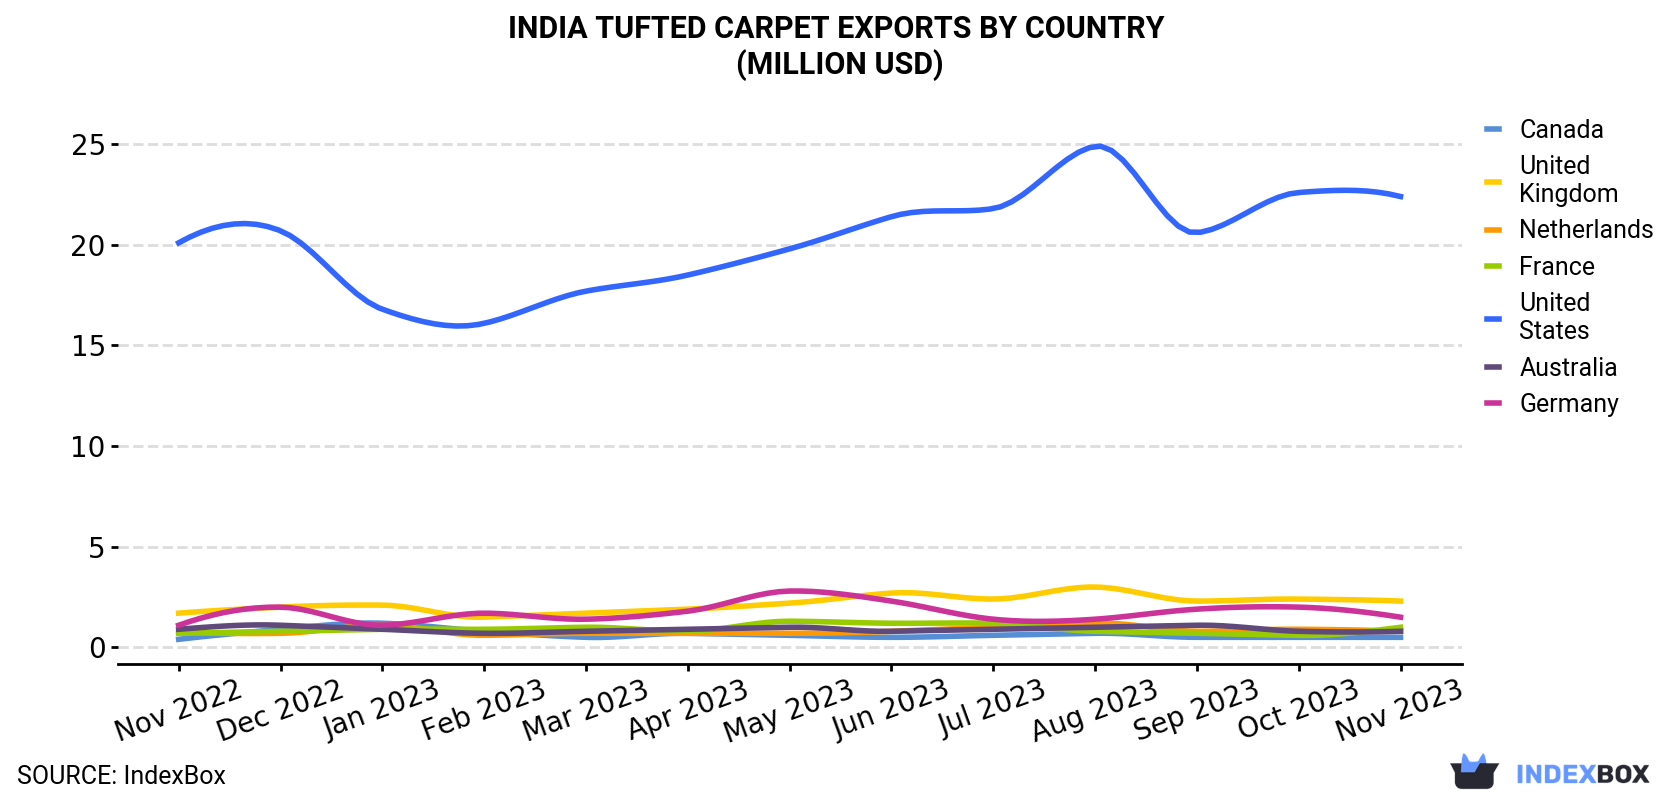 India Tufted Carpet Exports By Country (Million USD)